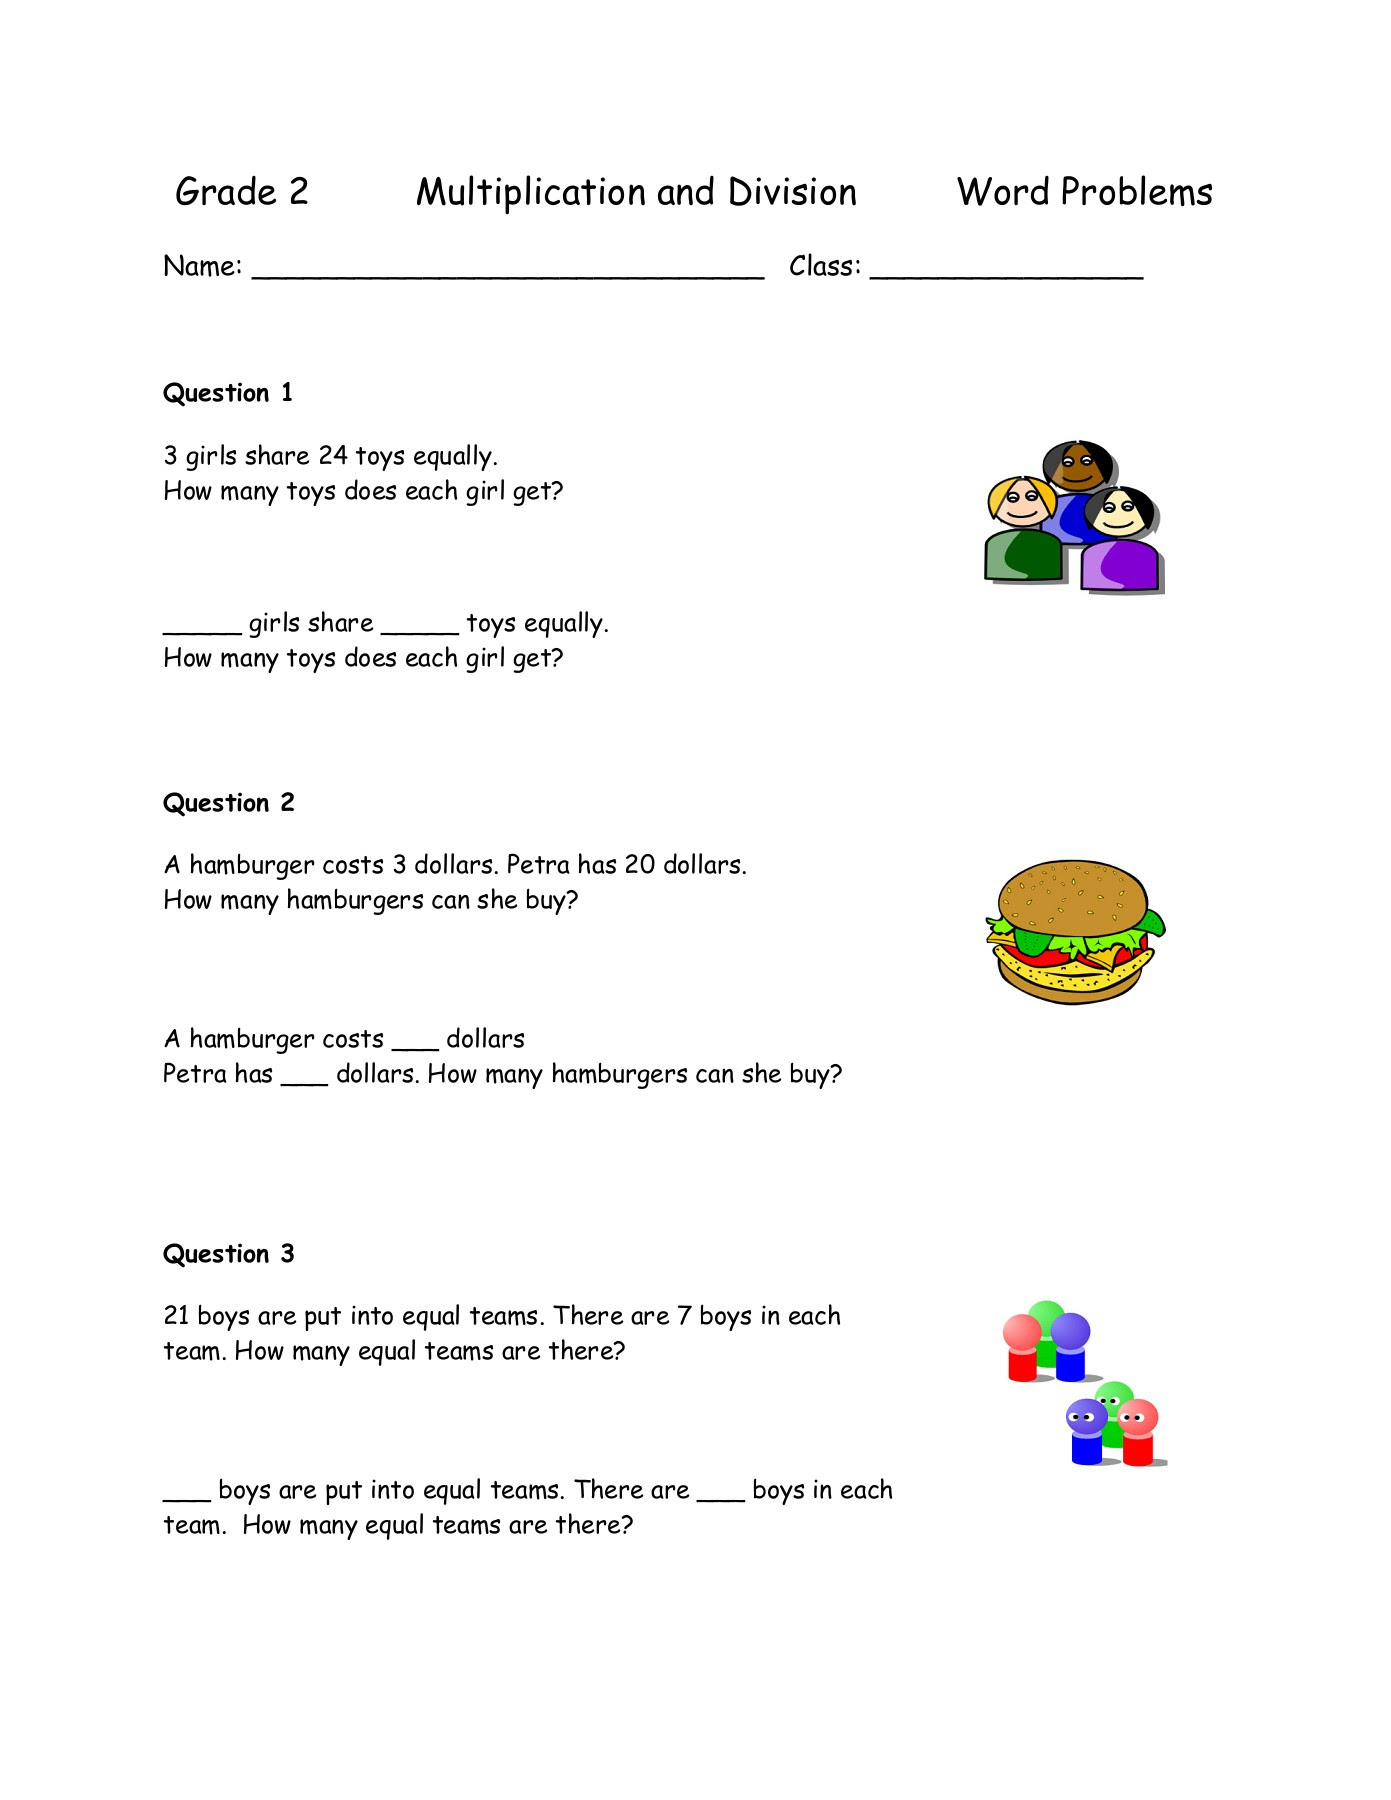 Single Step Multiplication And Division Word Problems Worksheet